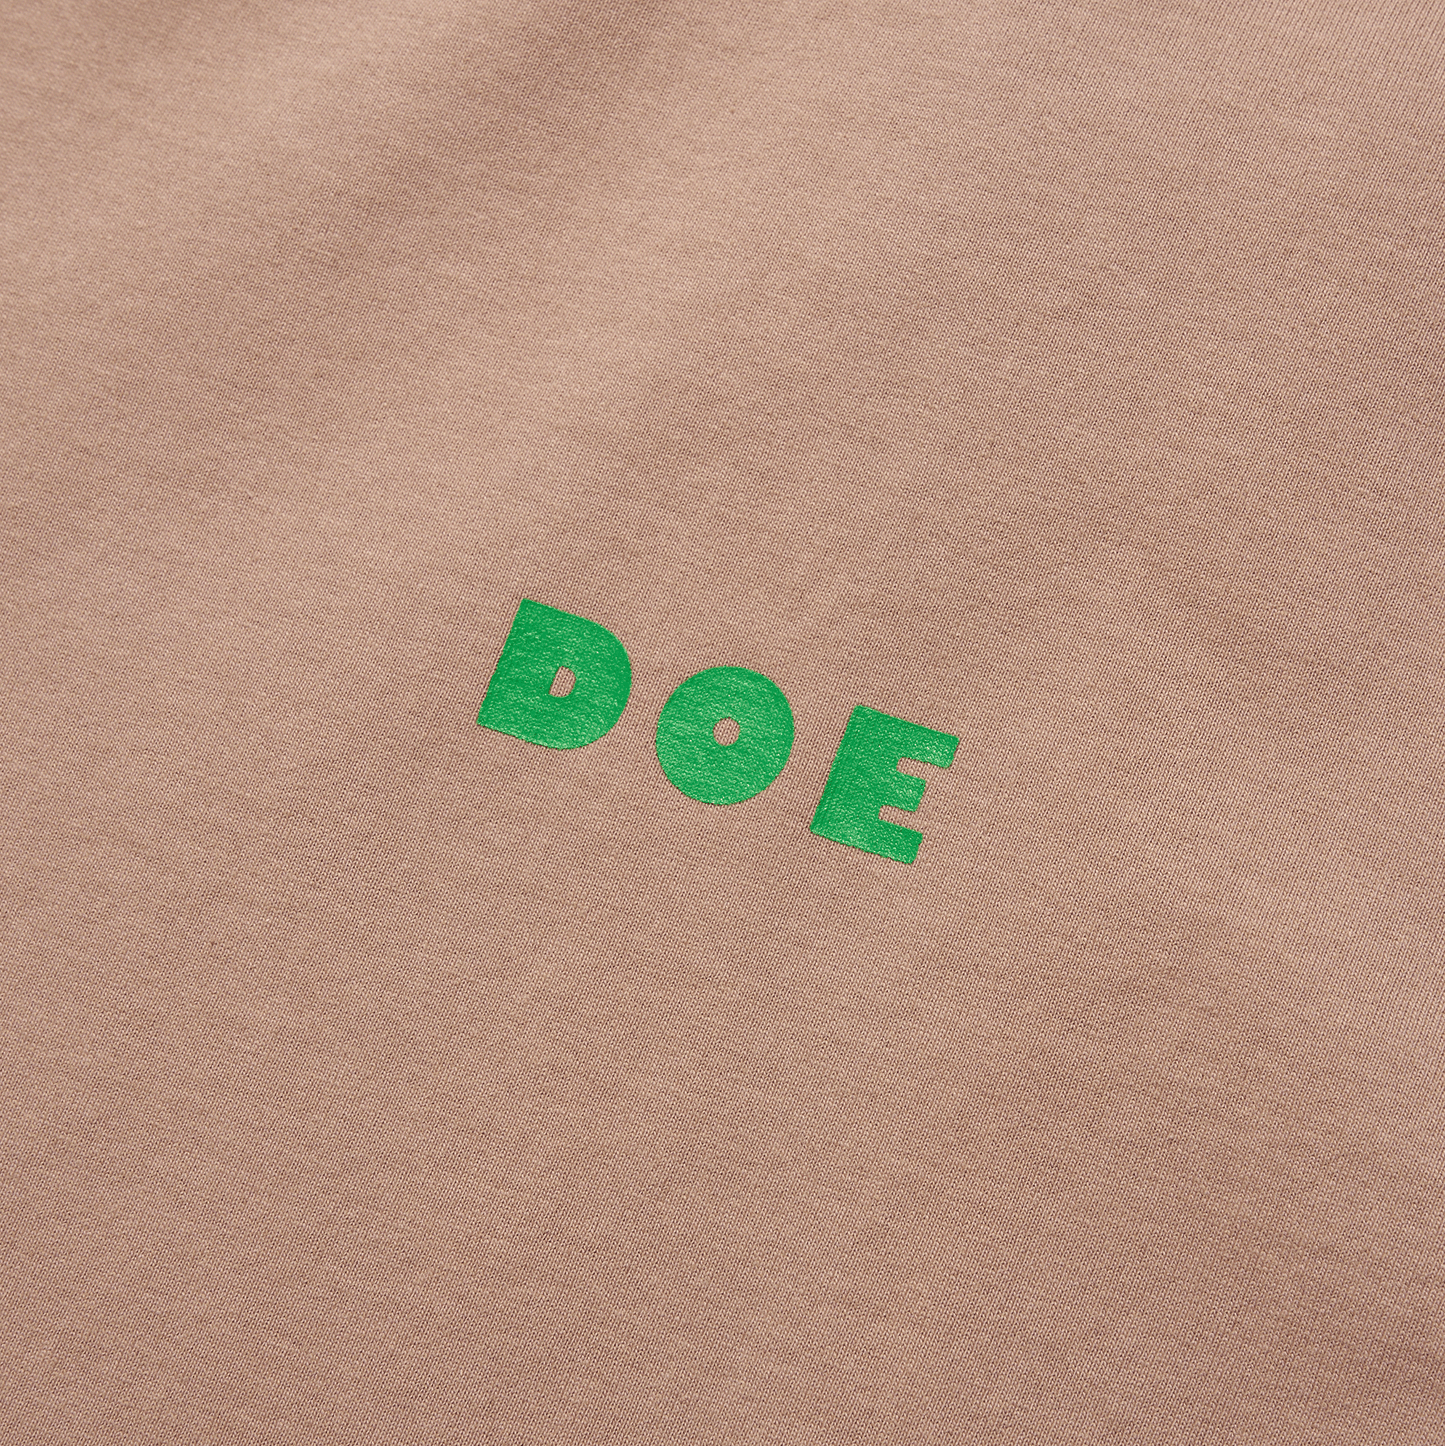 DOE FOREST TEE